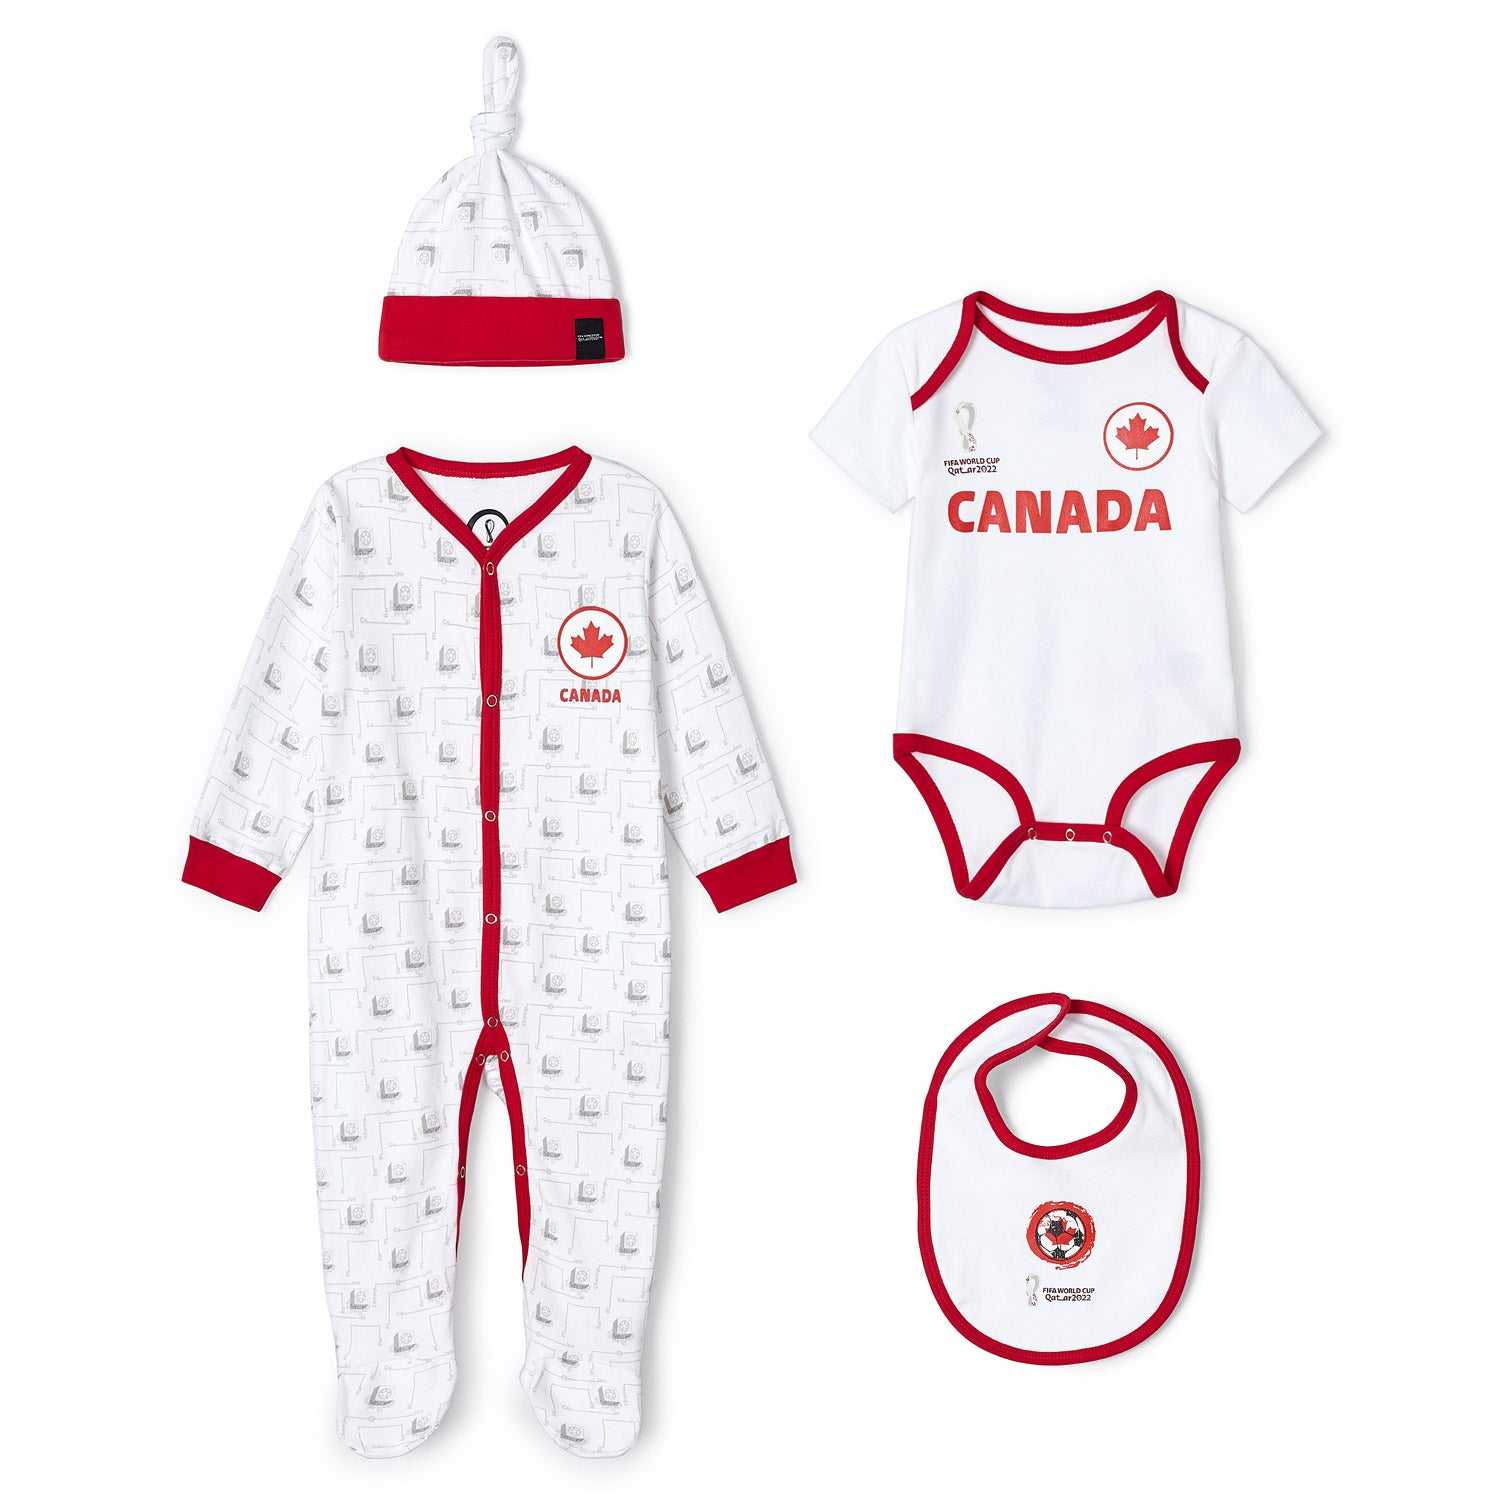 2022 World Cup Canada White Romper - Infant/Toddler